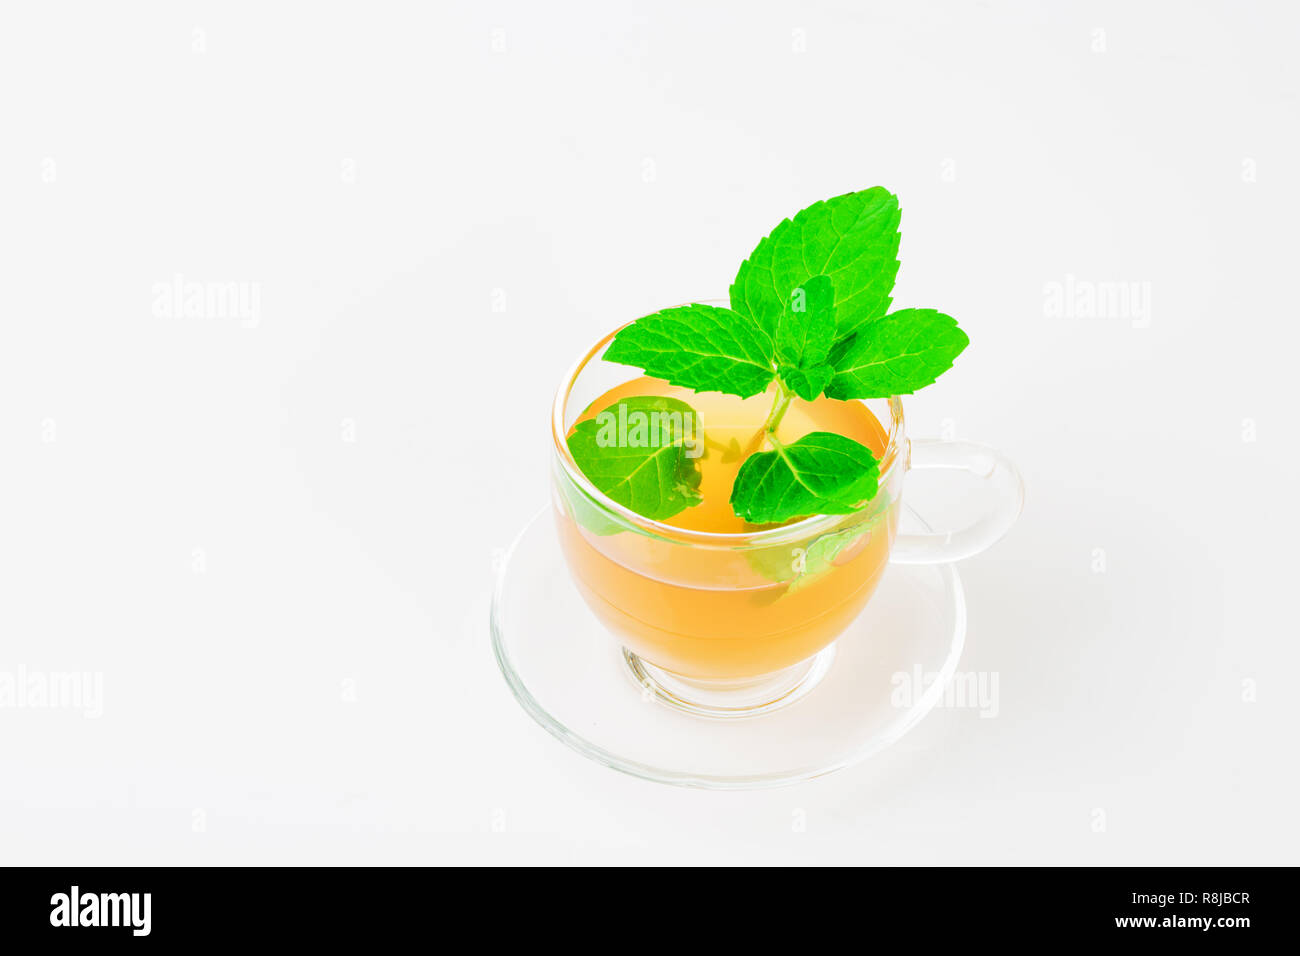 Mint tea. Cup of tea with fresh mint leaves on a white background. Stock Photo